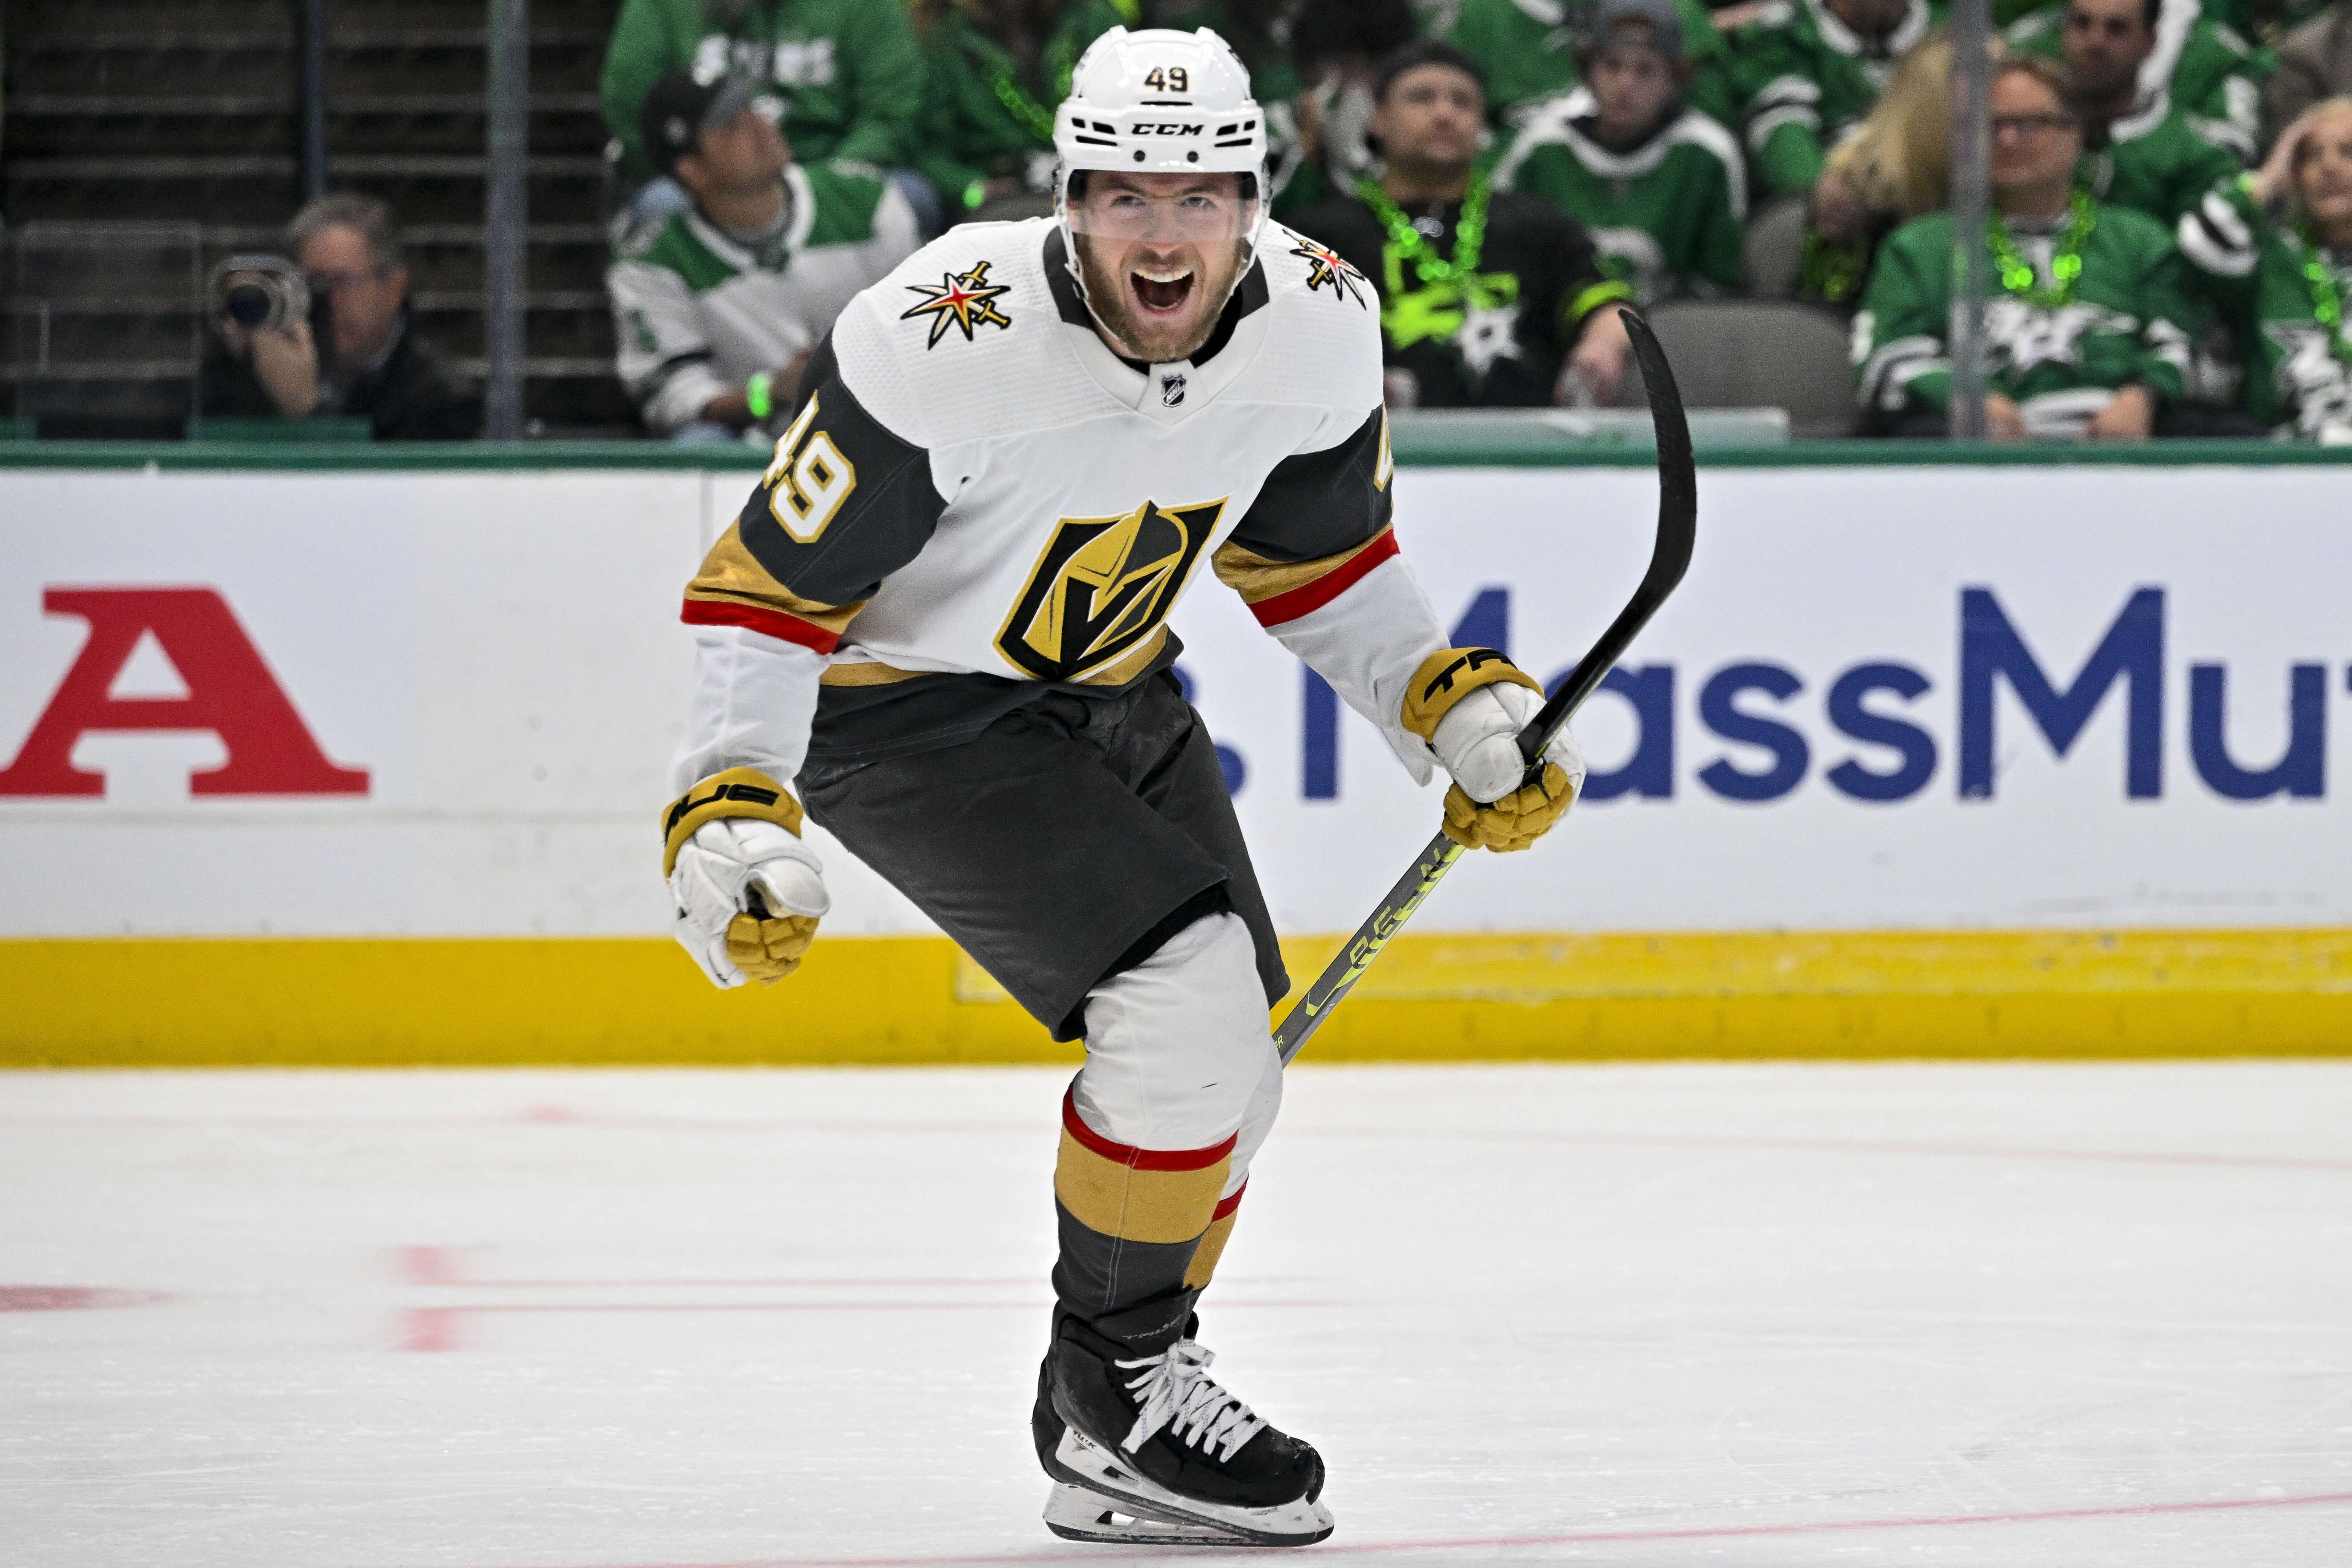 Panthers vs Golden Knights Game 1 Odds, Picks, and Predictions: Barbashev a Cut Above